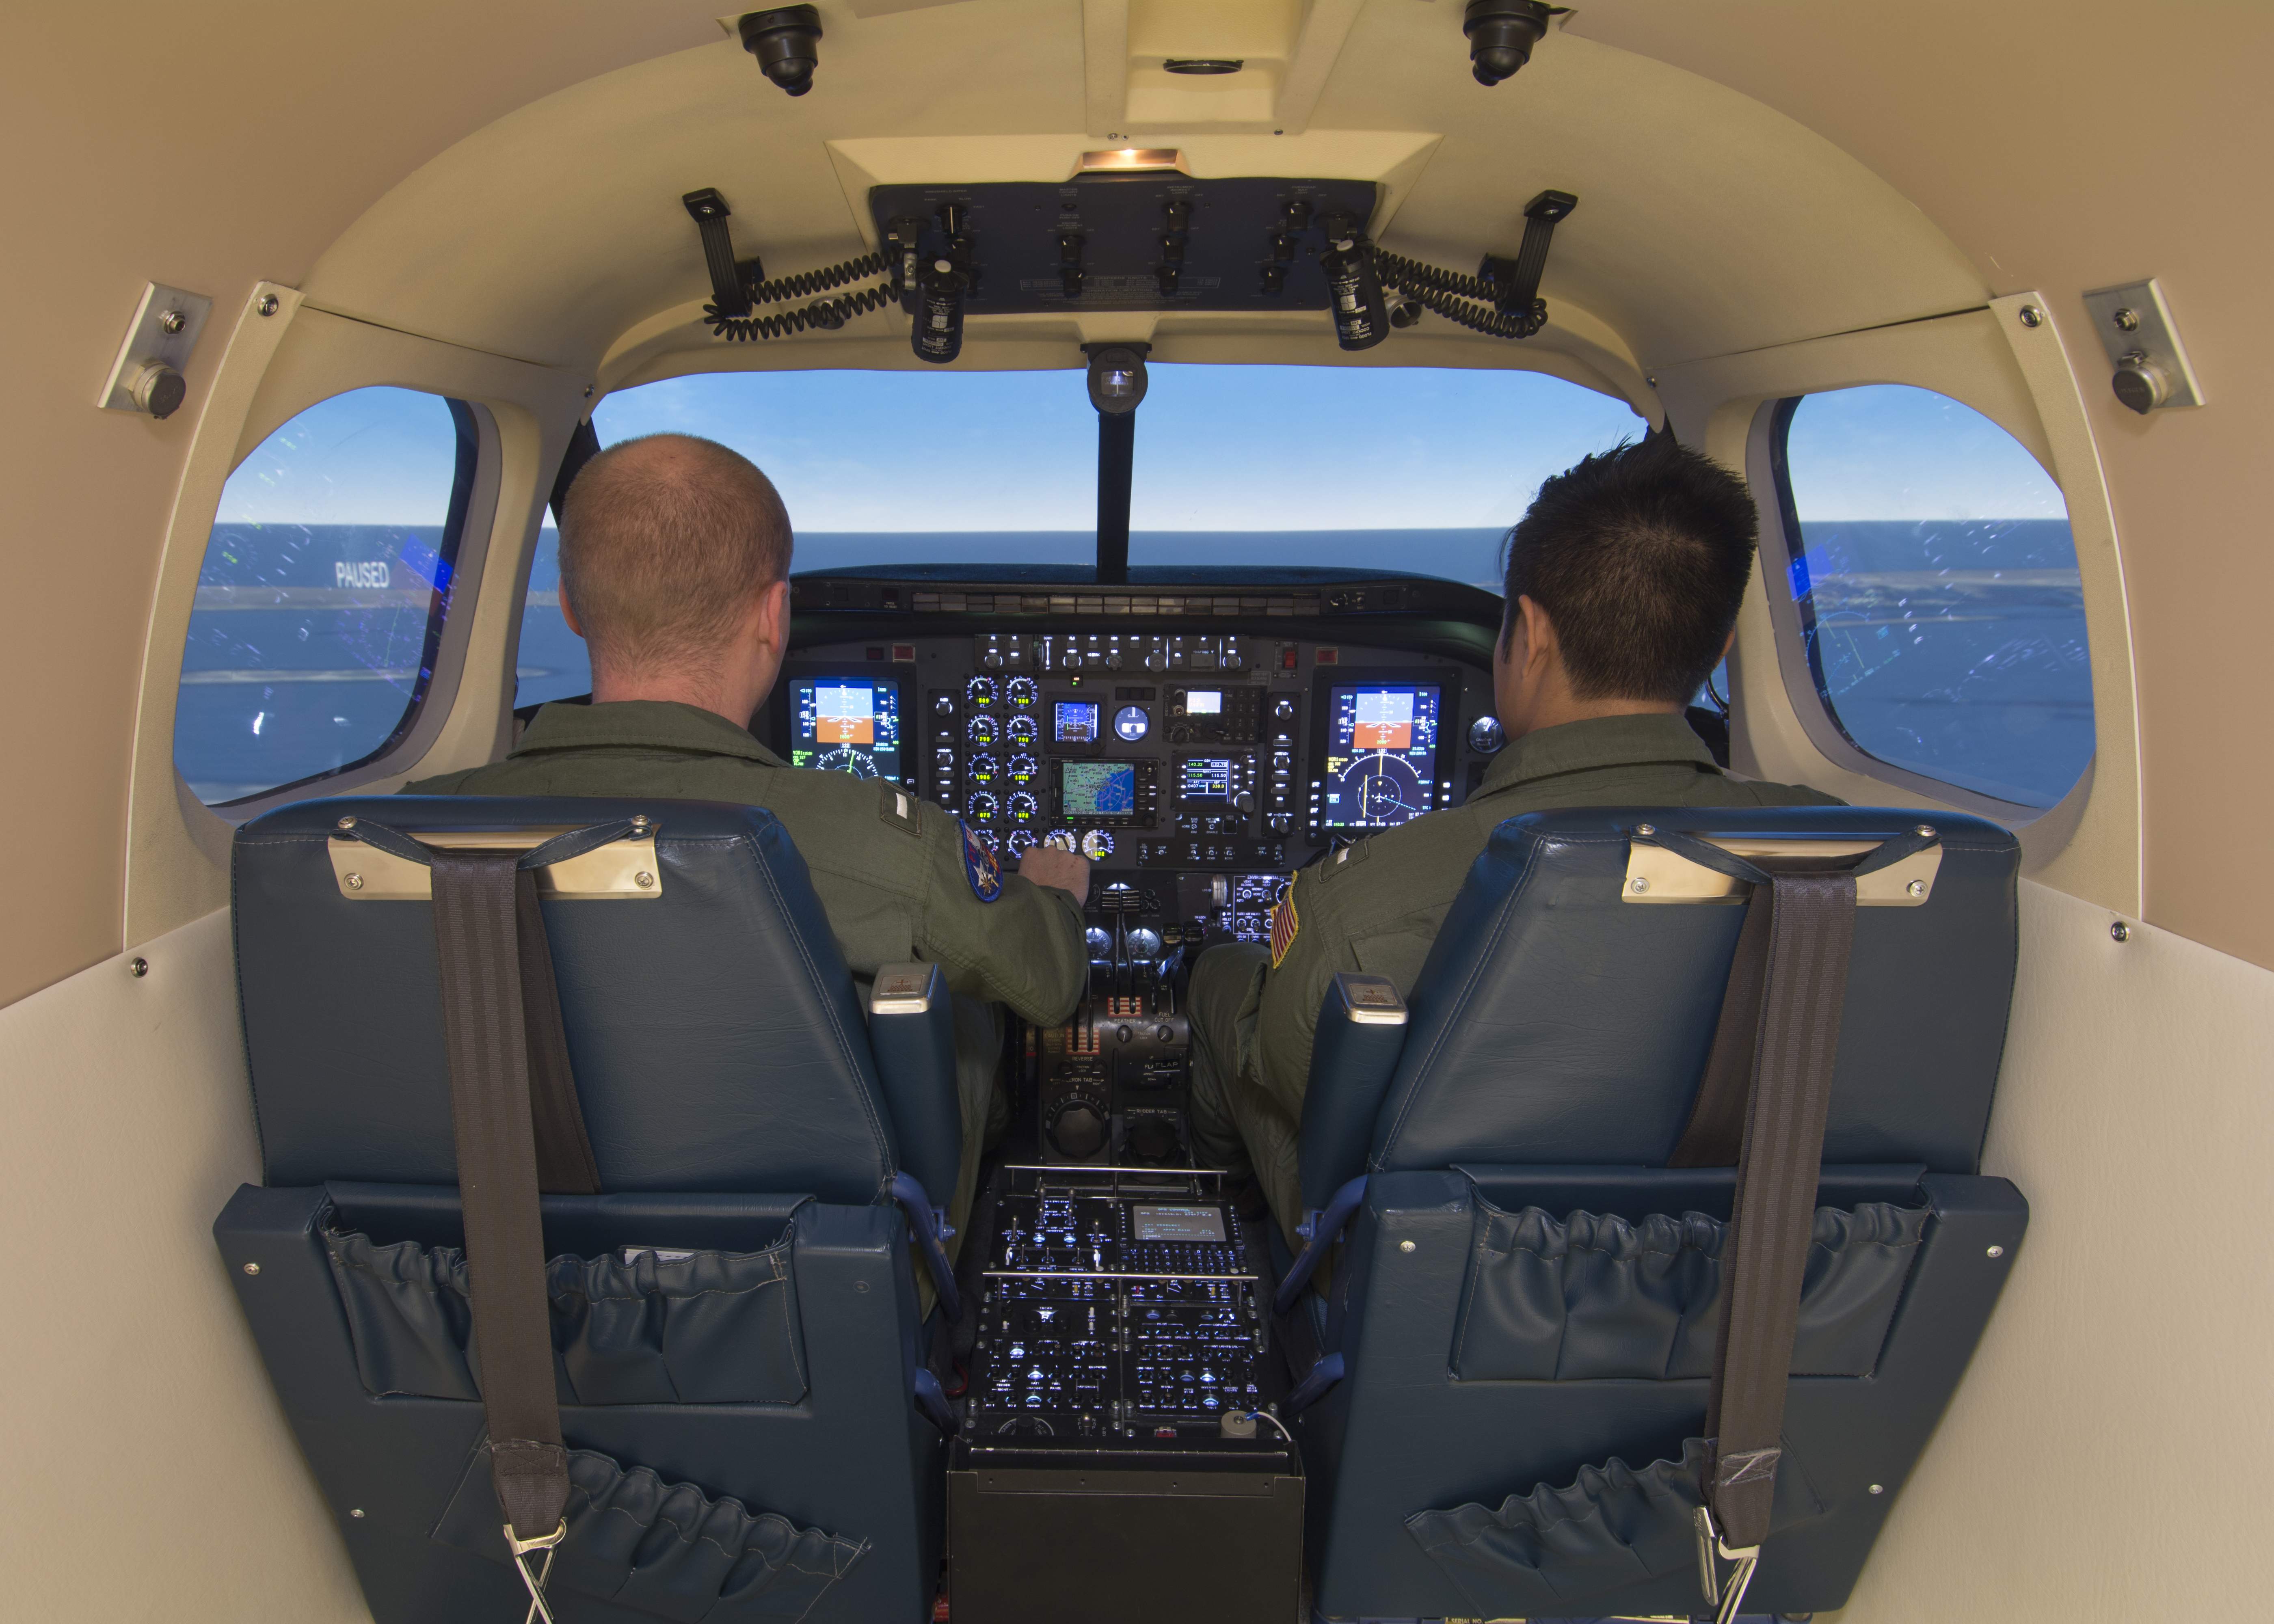 CAE begins delivery of new T-44C flight training devices to U.S.